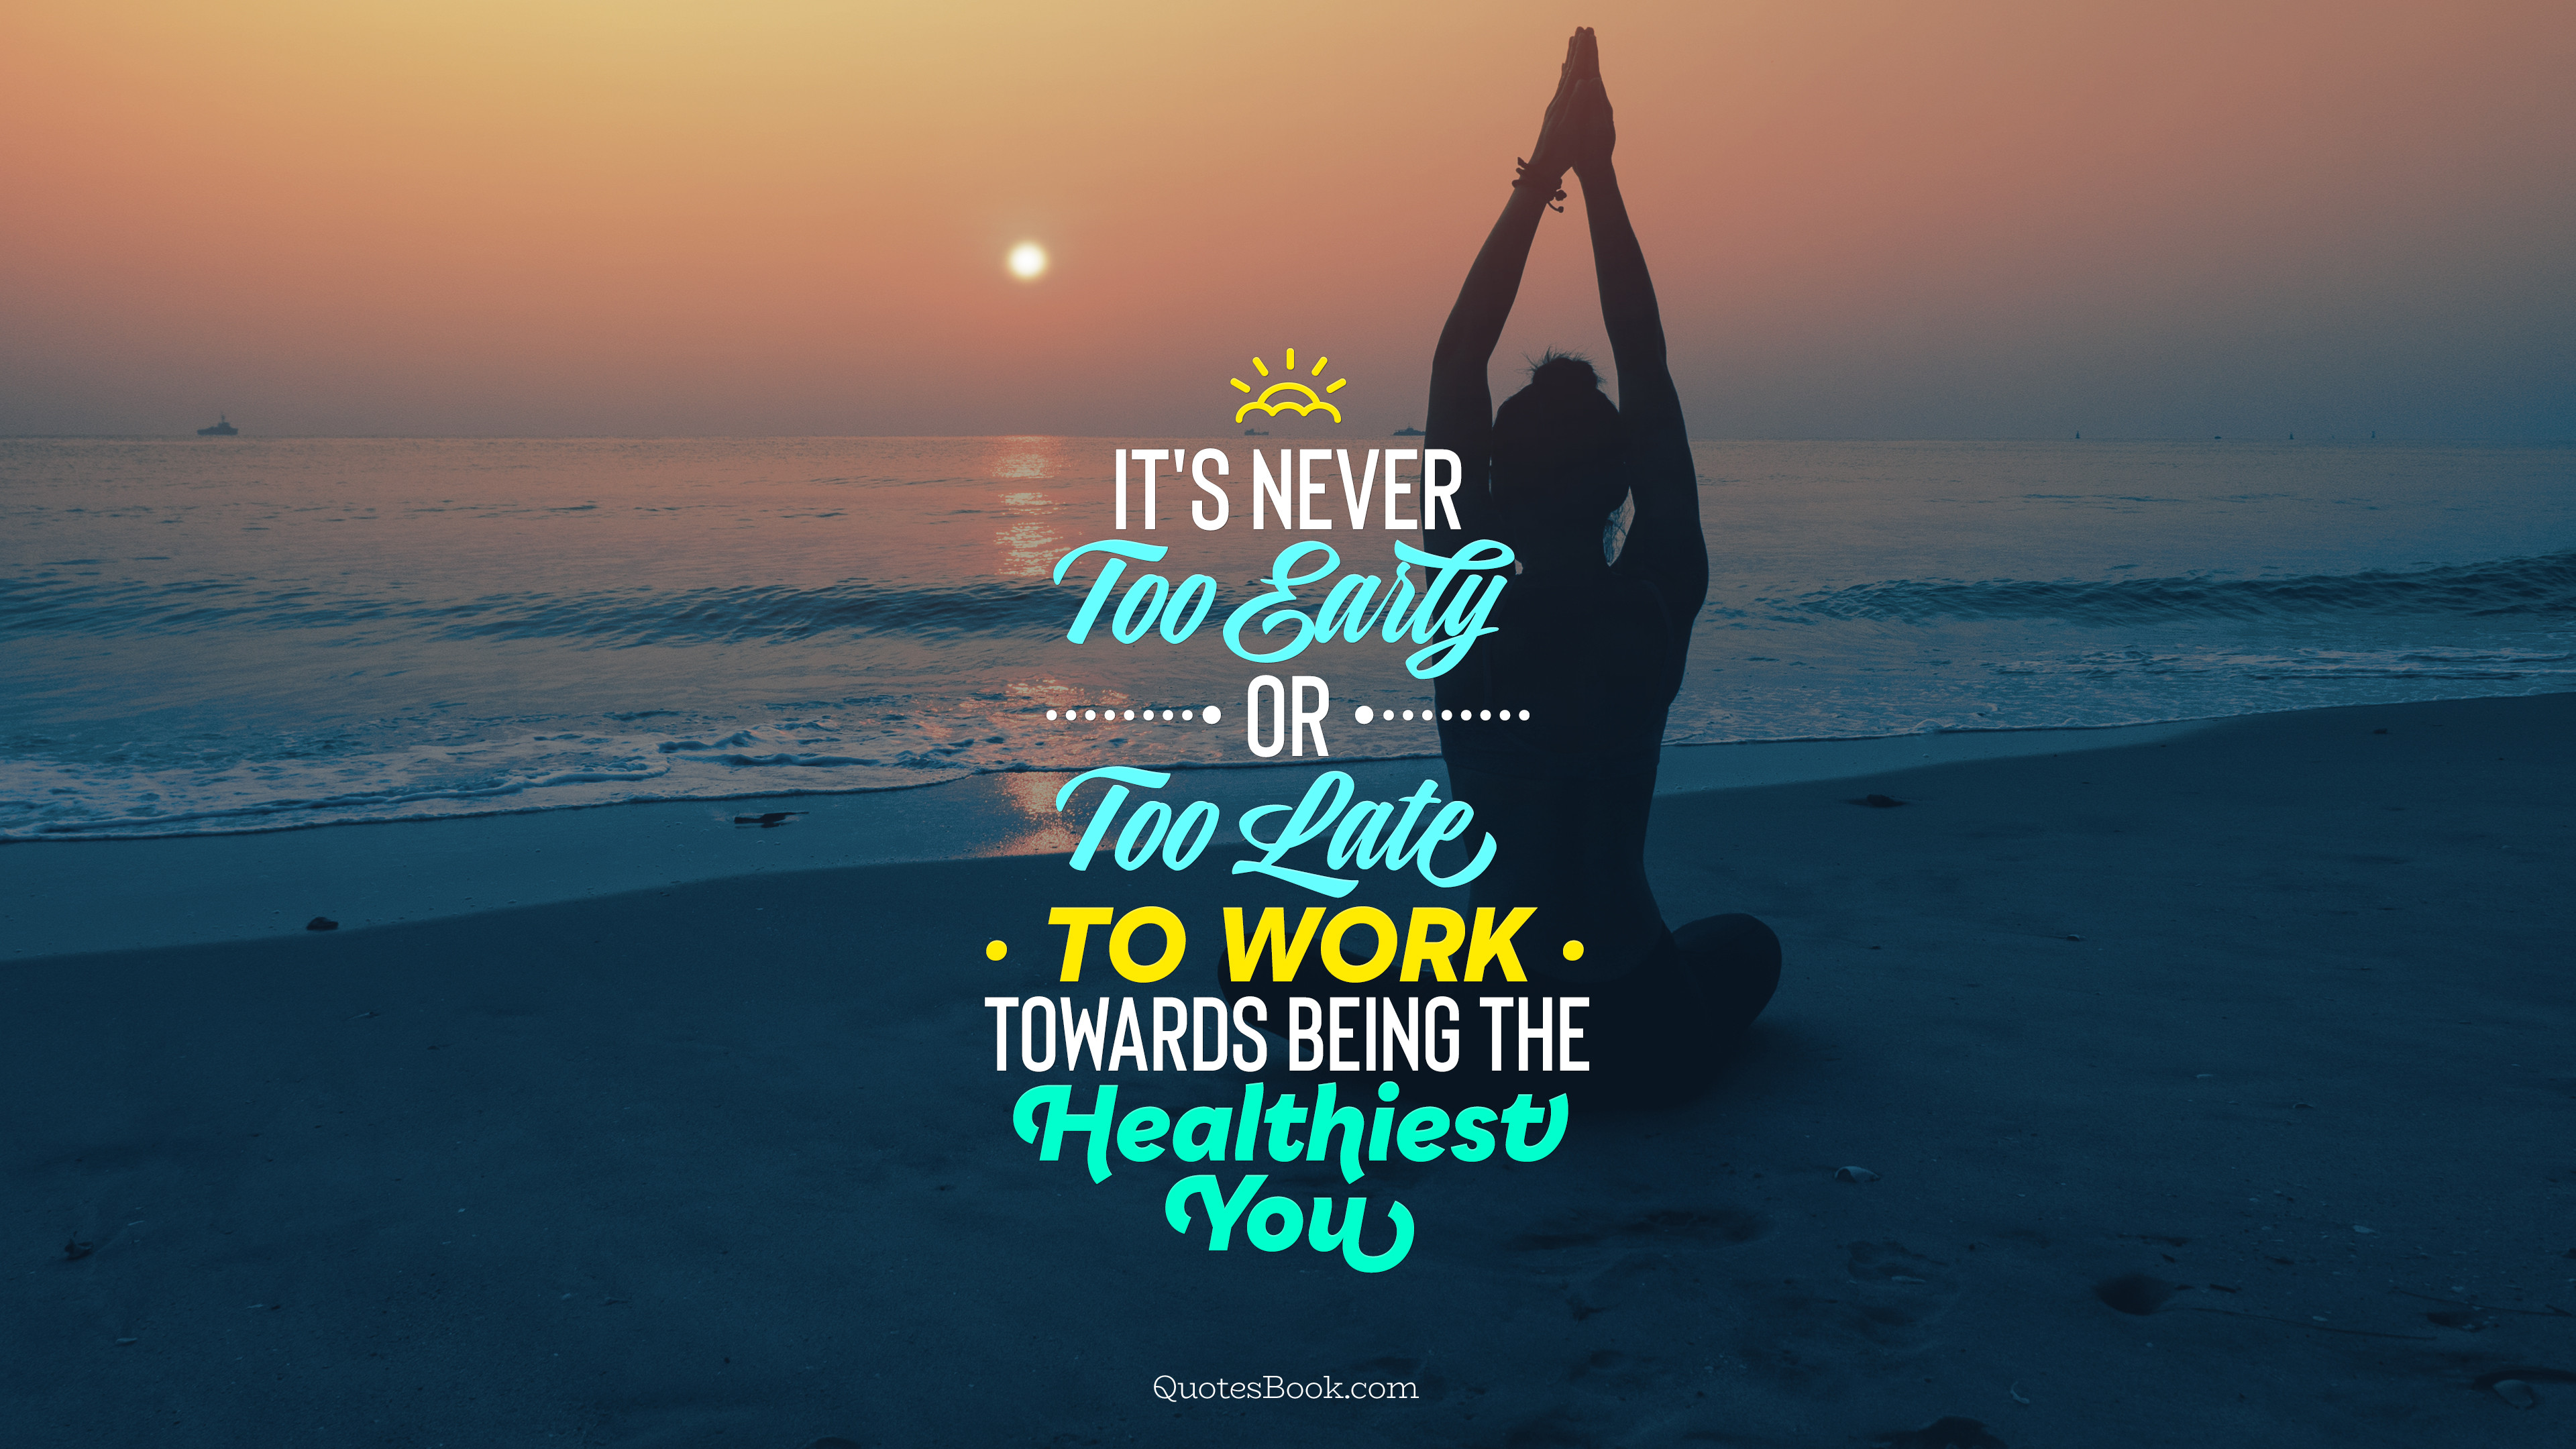 It's never too early or too late to work towards being the healthiest